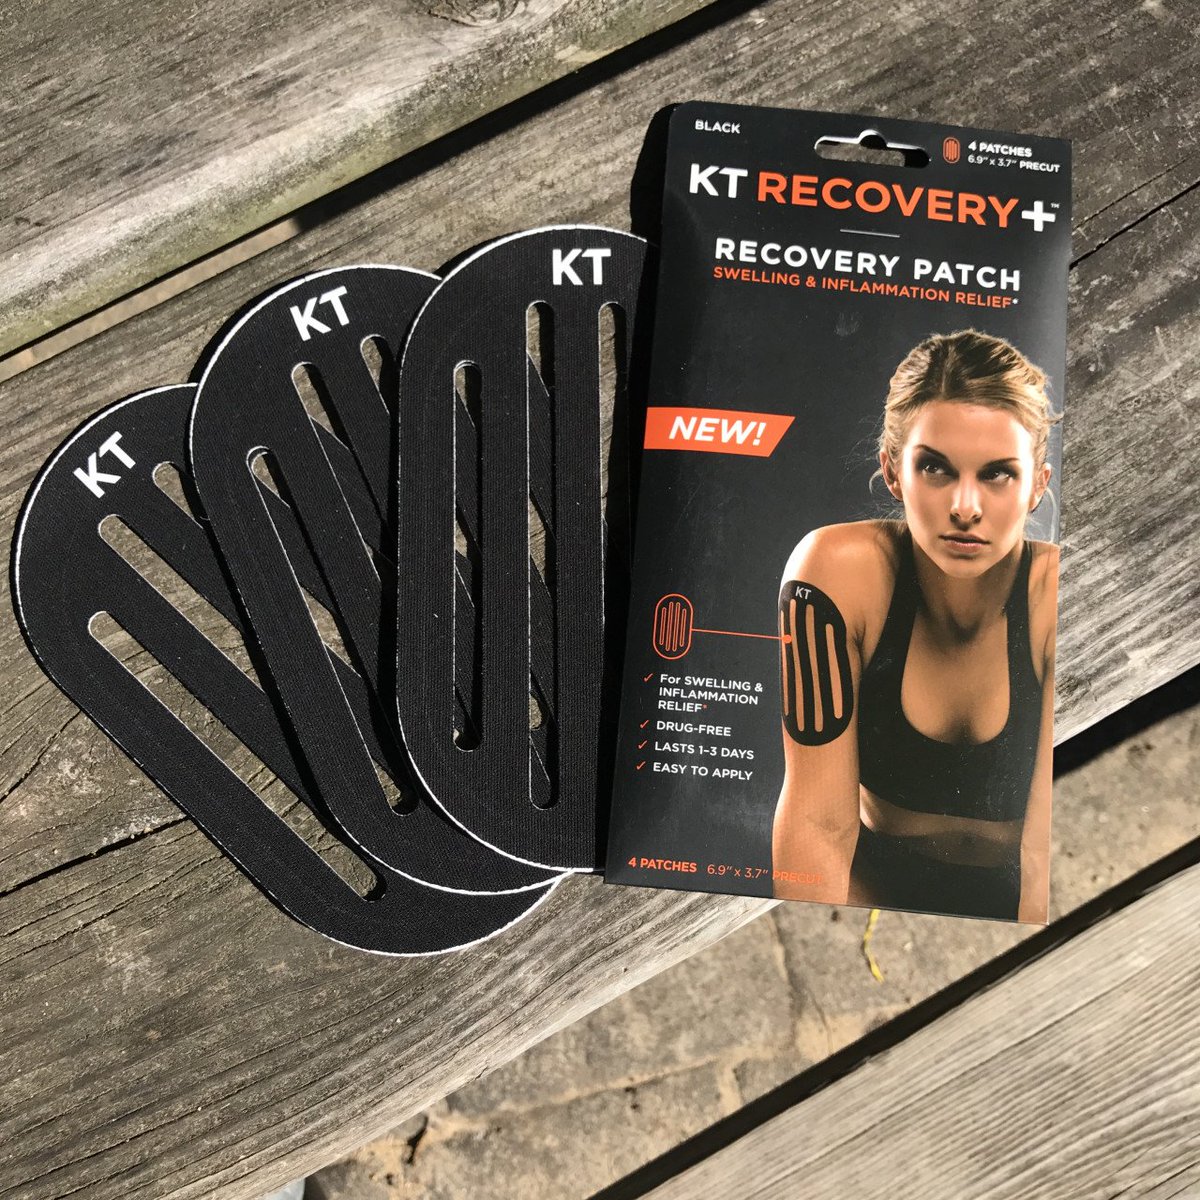 KT Tape, Recovery Patch, Tape for Swelling and Inflammation Relief, Black